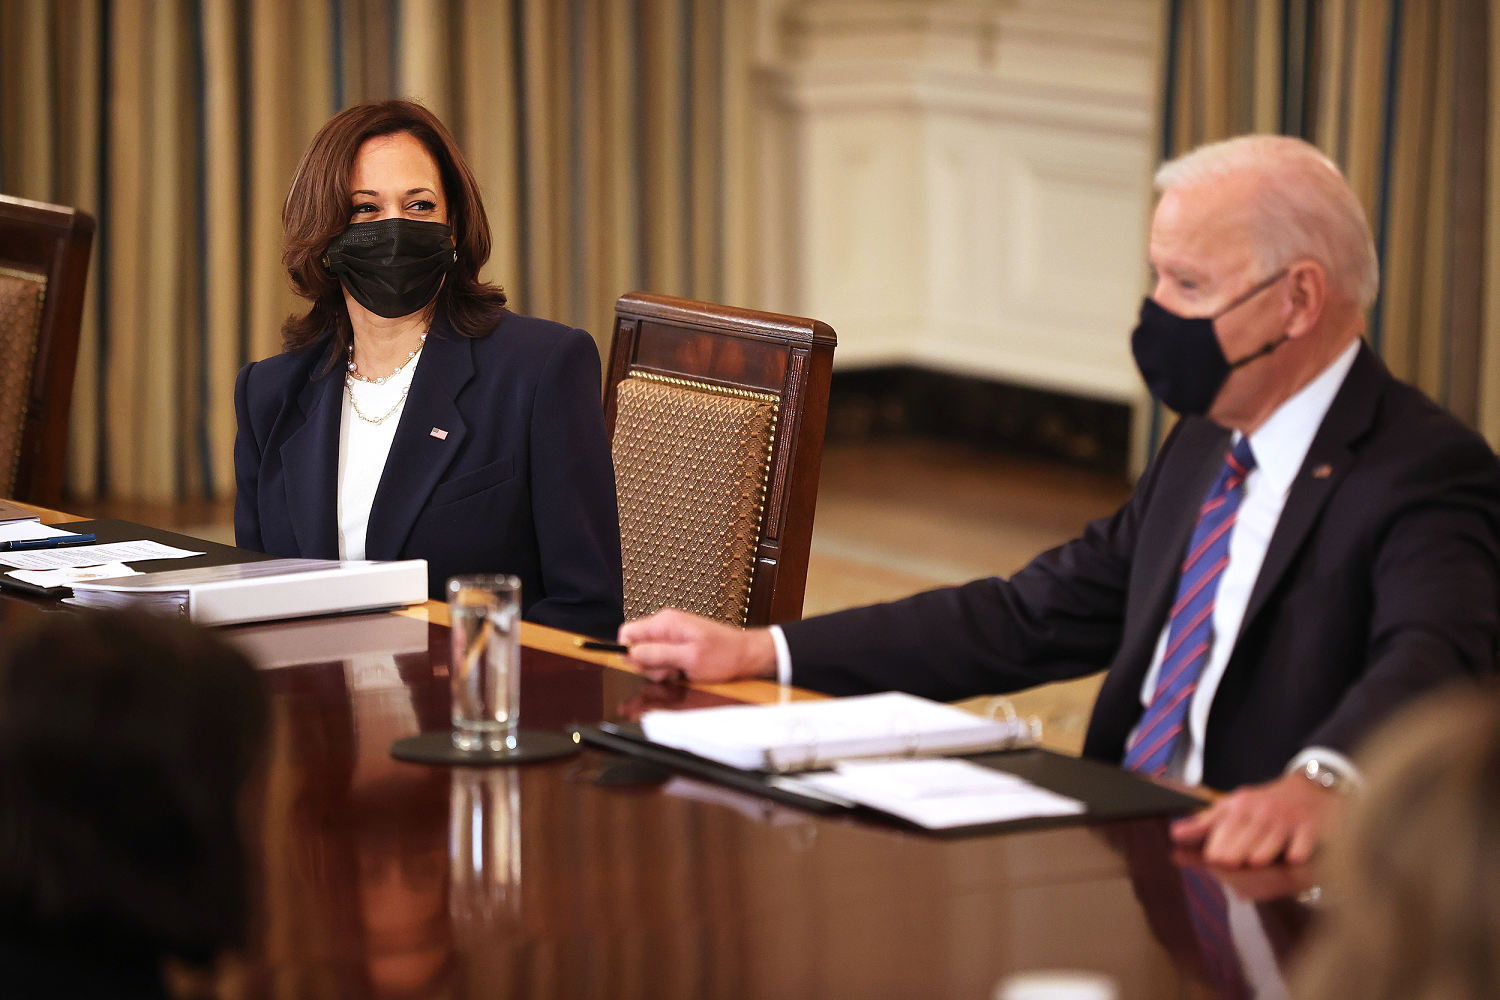 In 2021, Biden asked Harris to tackle the 'root causes' of migration. Here's what followed.